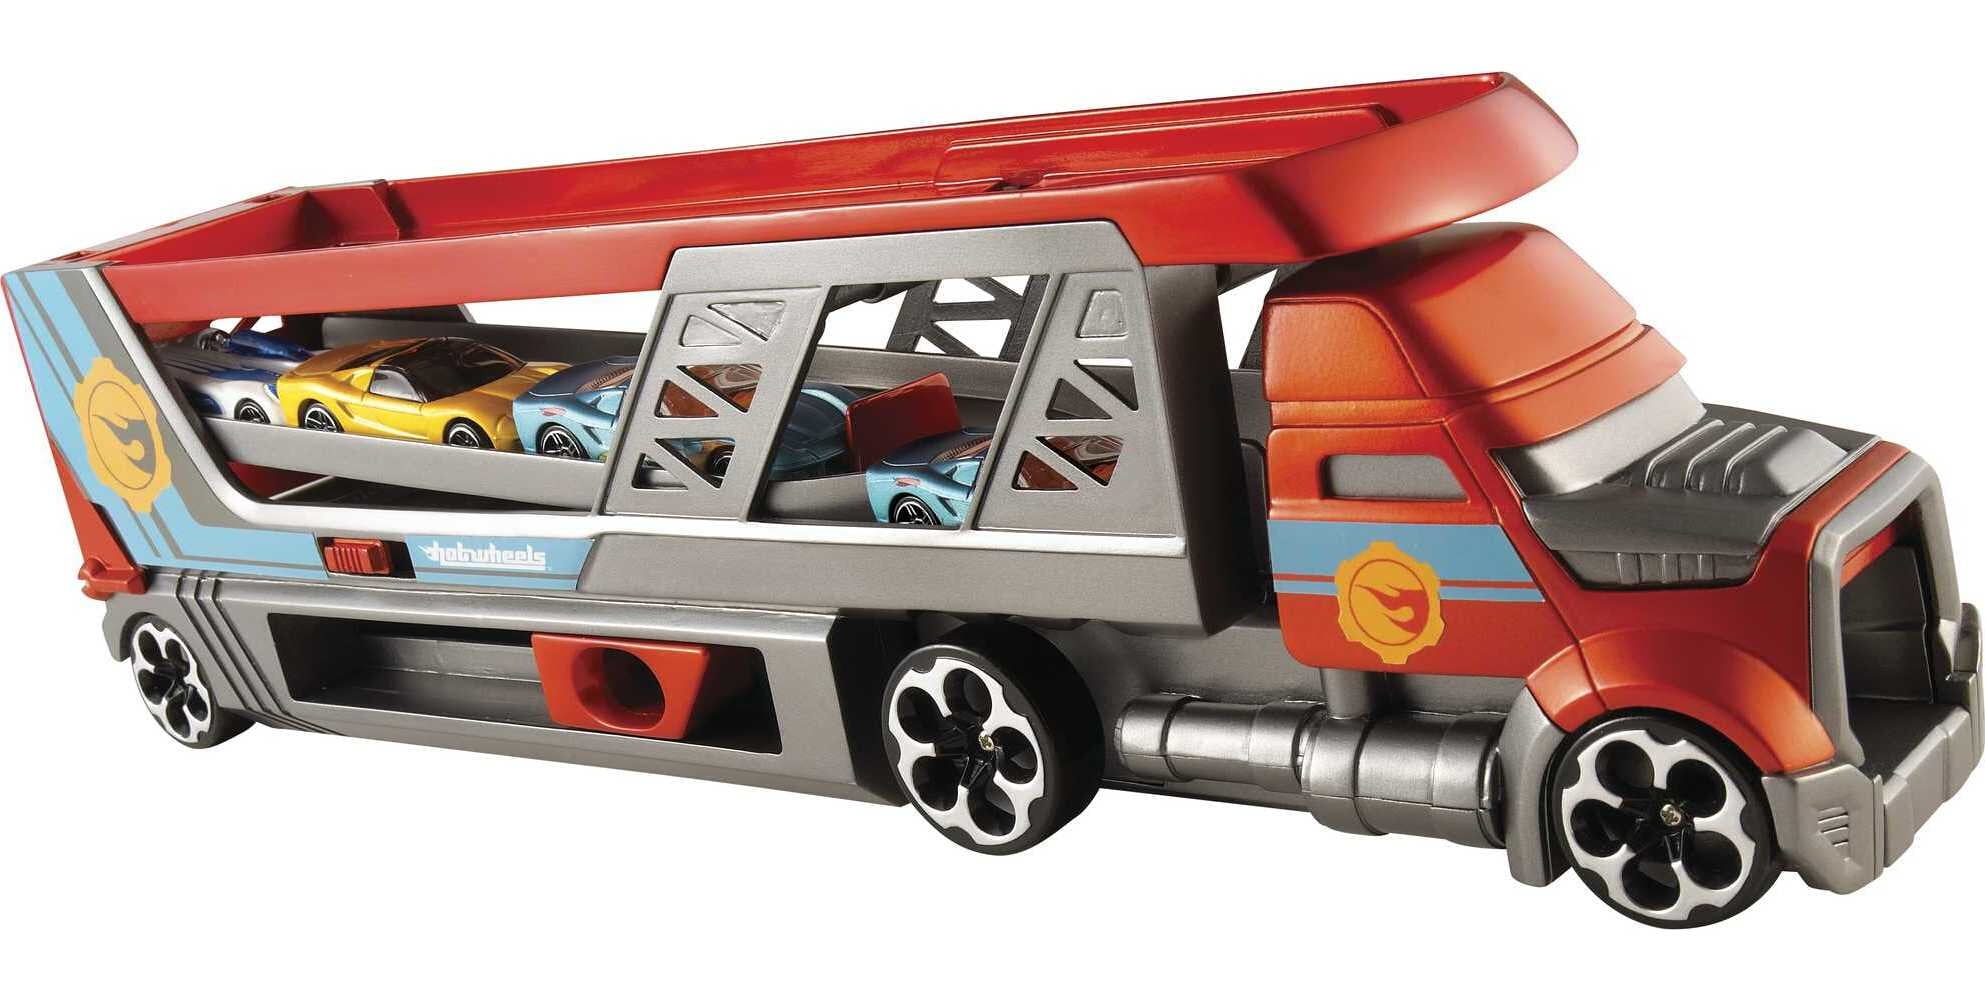 Hot Wheels City Lift & Launch Hauler with 1:64 Scale Toy Car